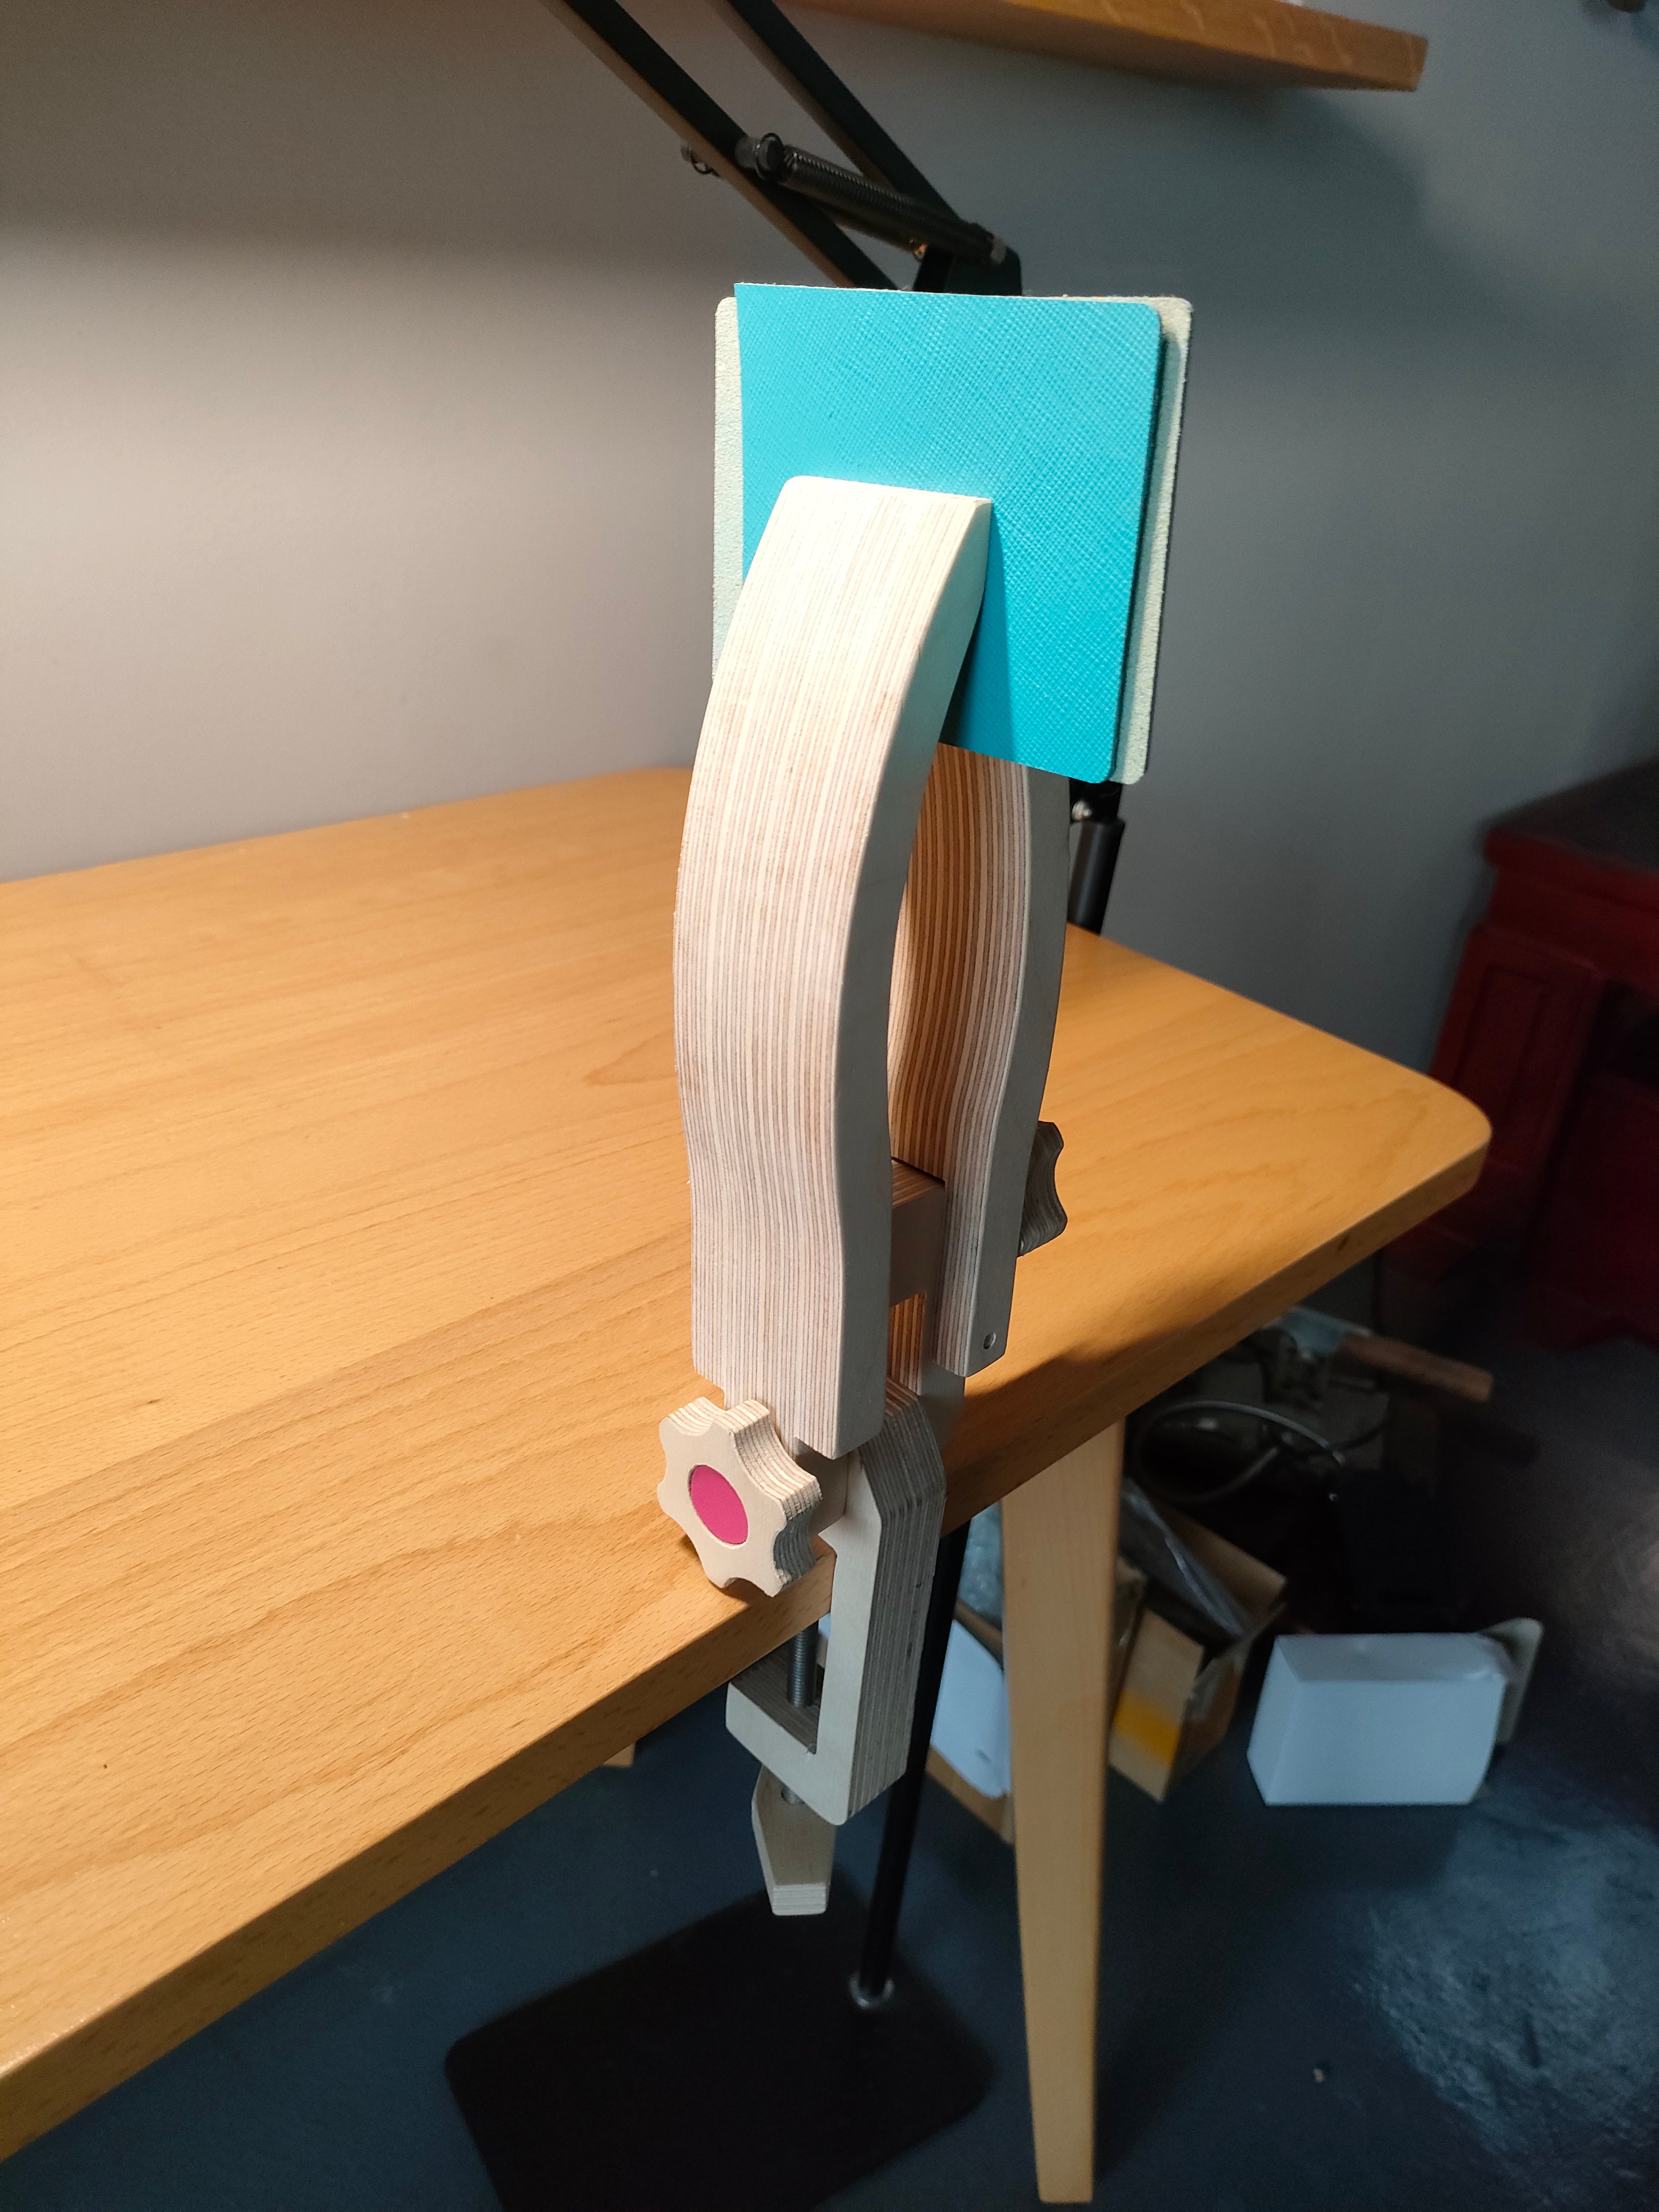 How To Make a Leather Stitching Pony Clamp